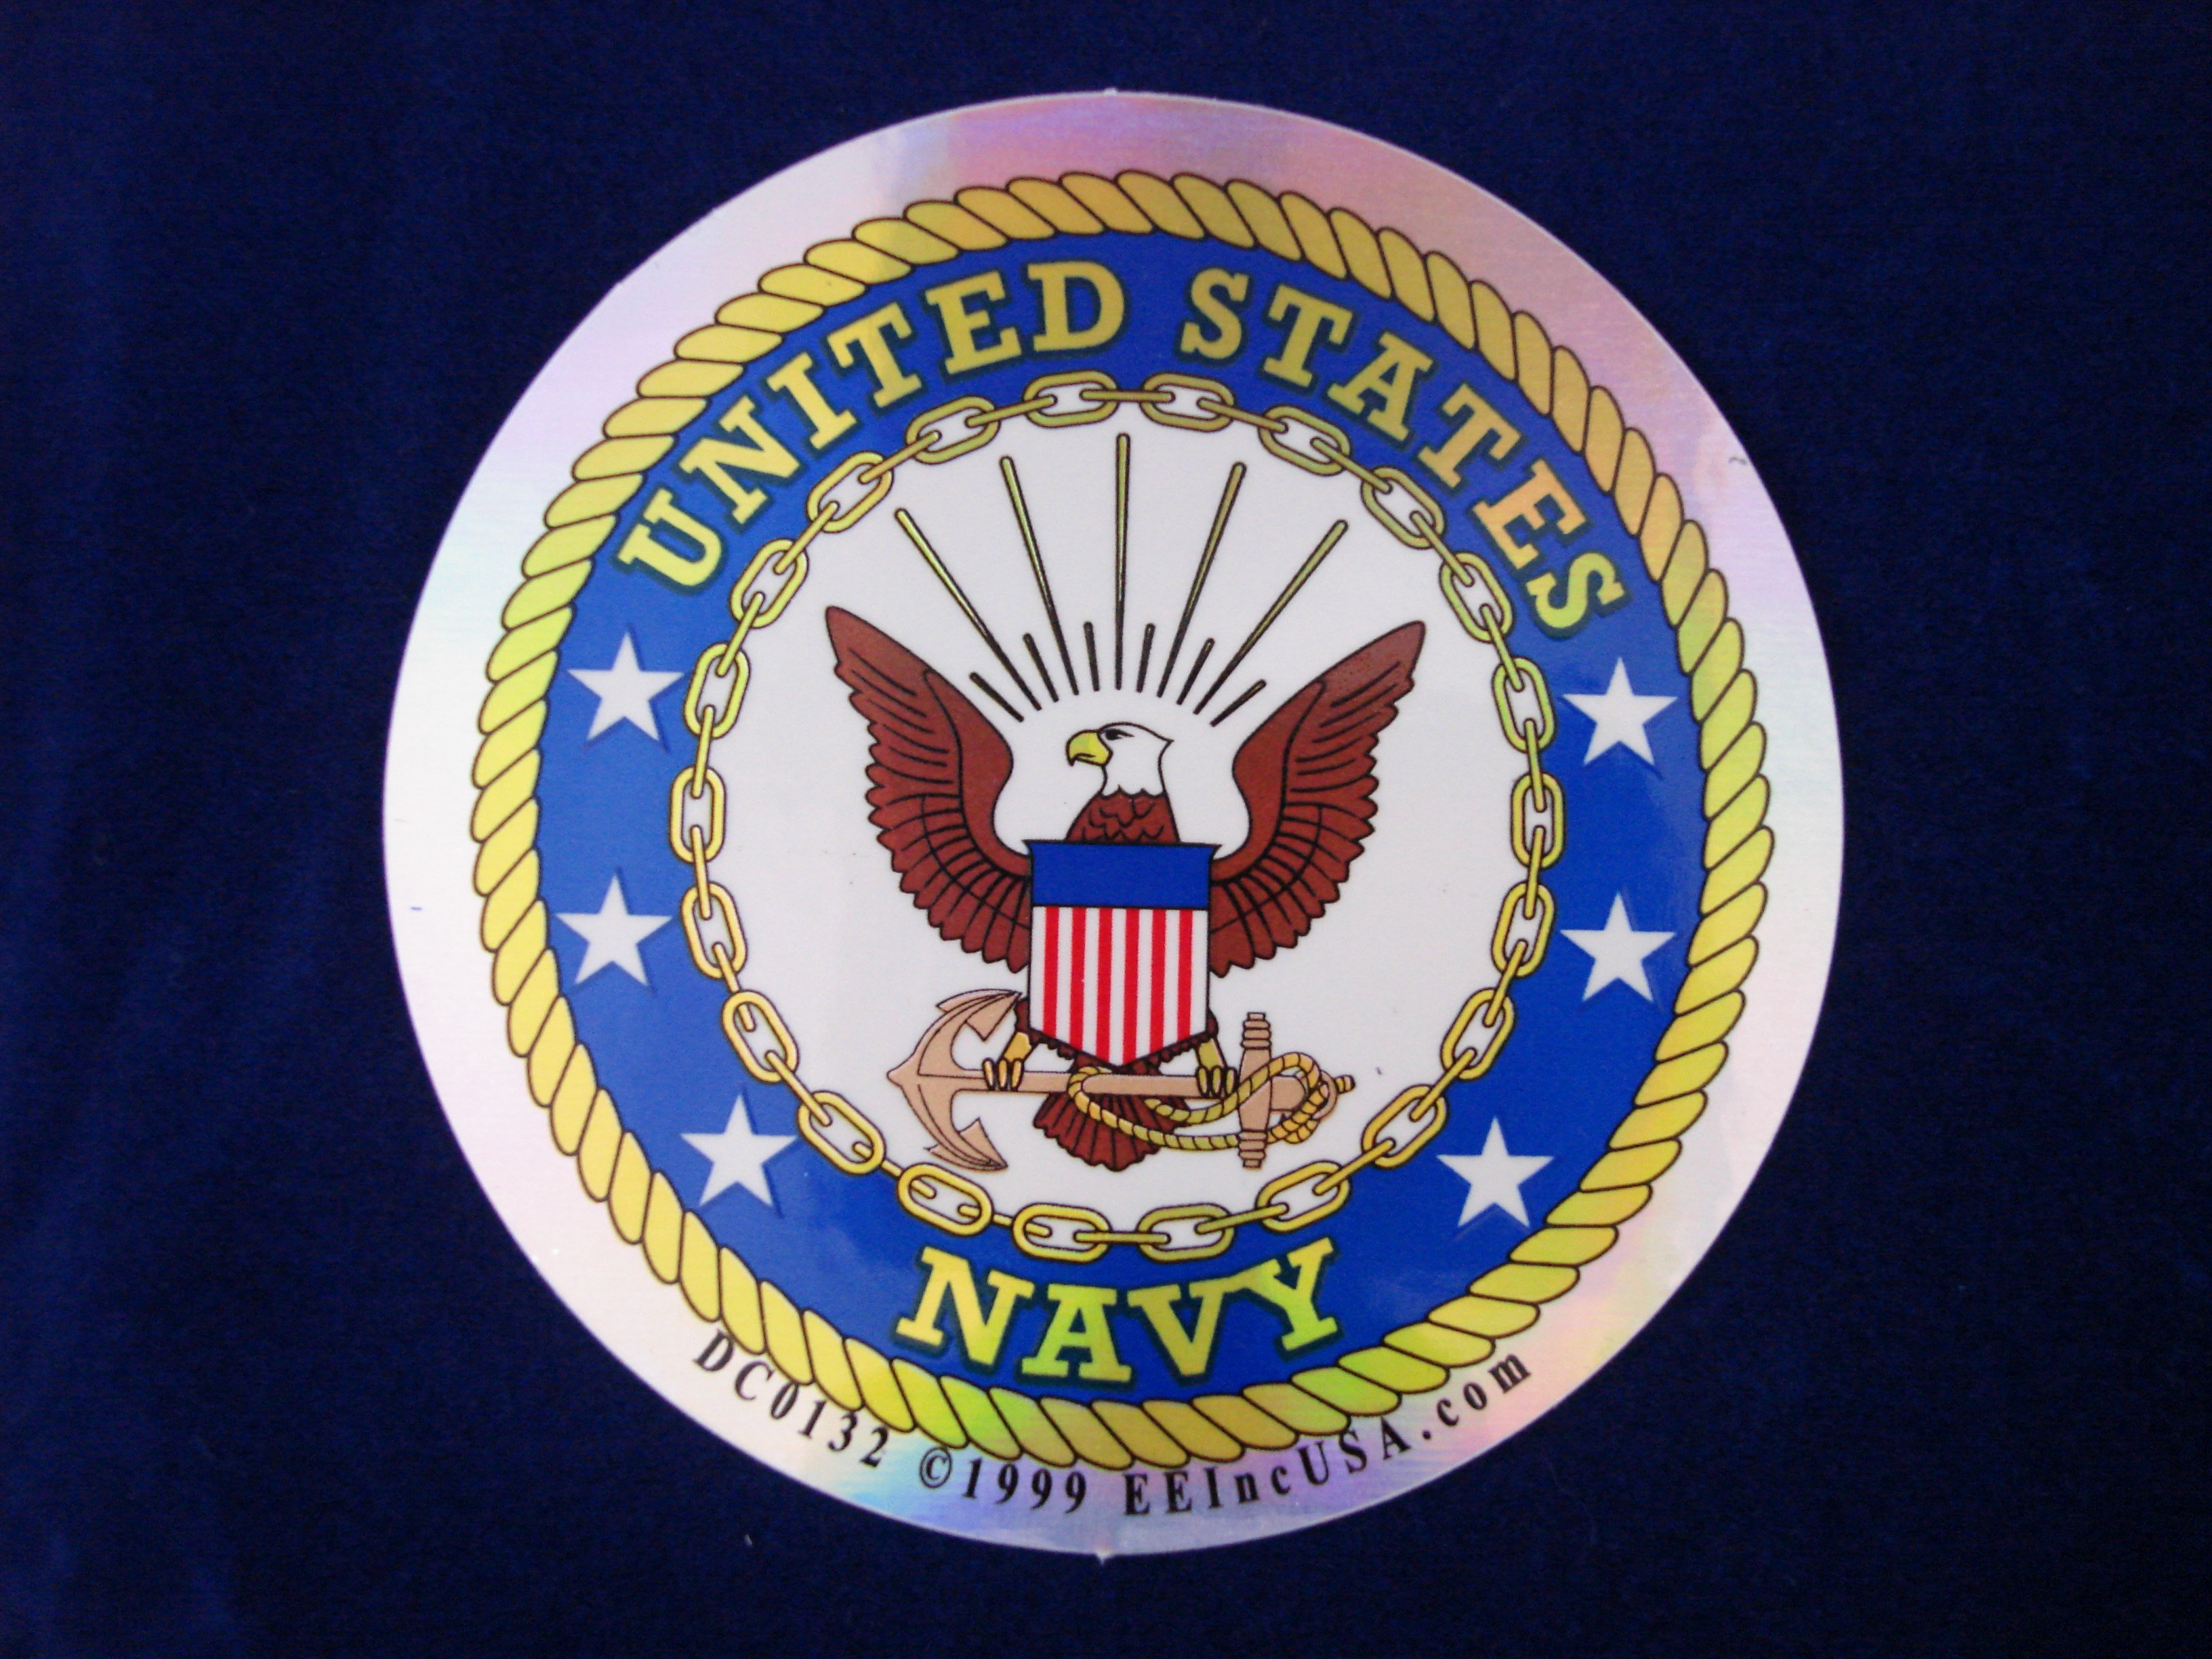 Navy Logo Wallpaper Picture Image and Wallpaper Download this Navy